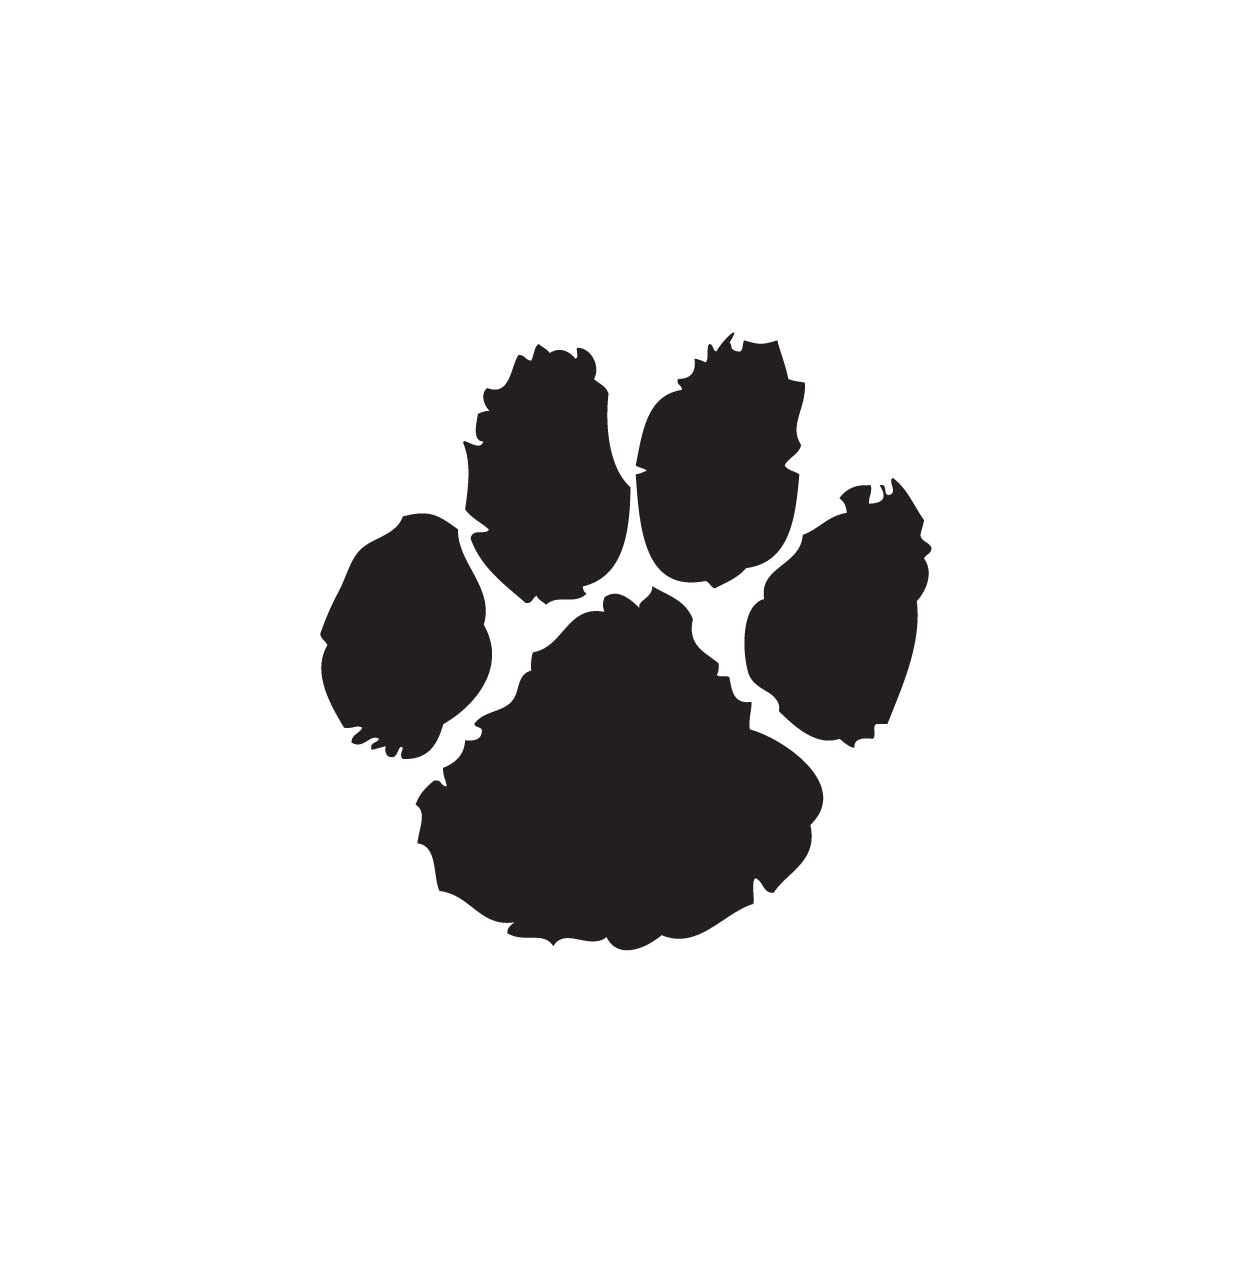 Dog paw print clipart free black and white